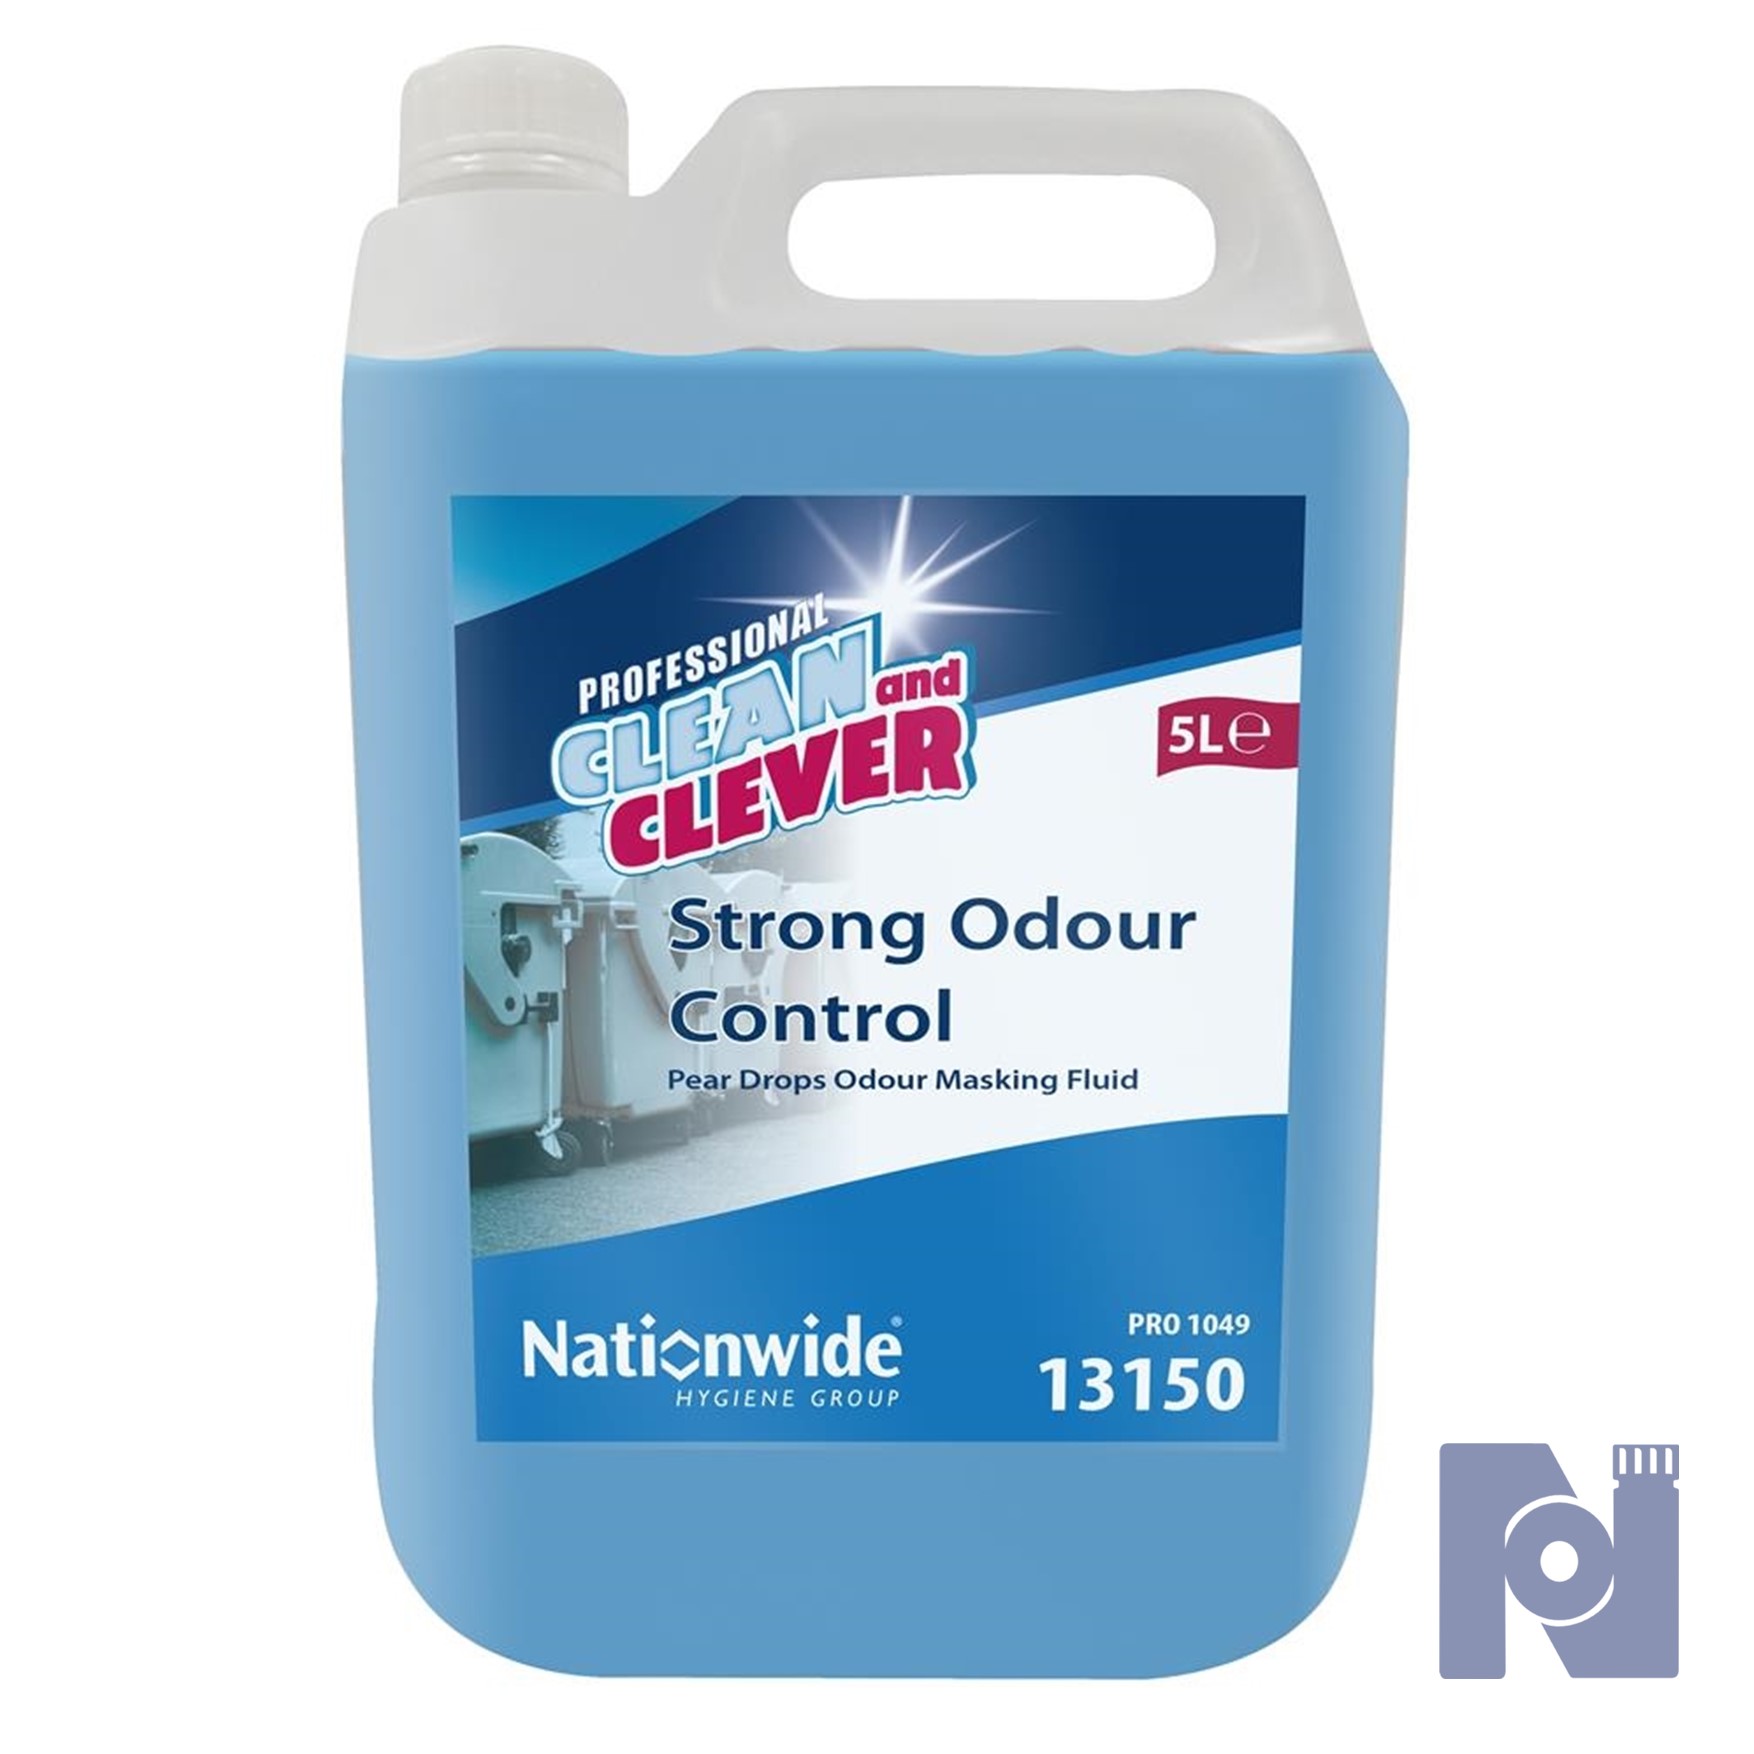 Clean & Clever Strong Odour Control